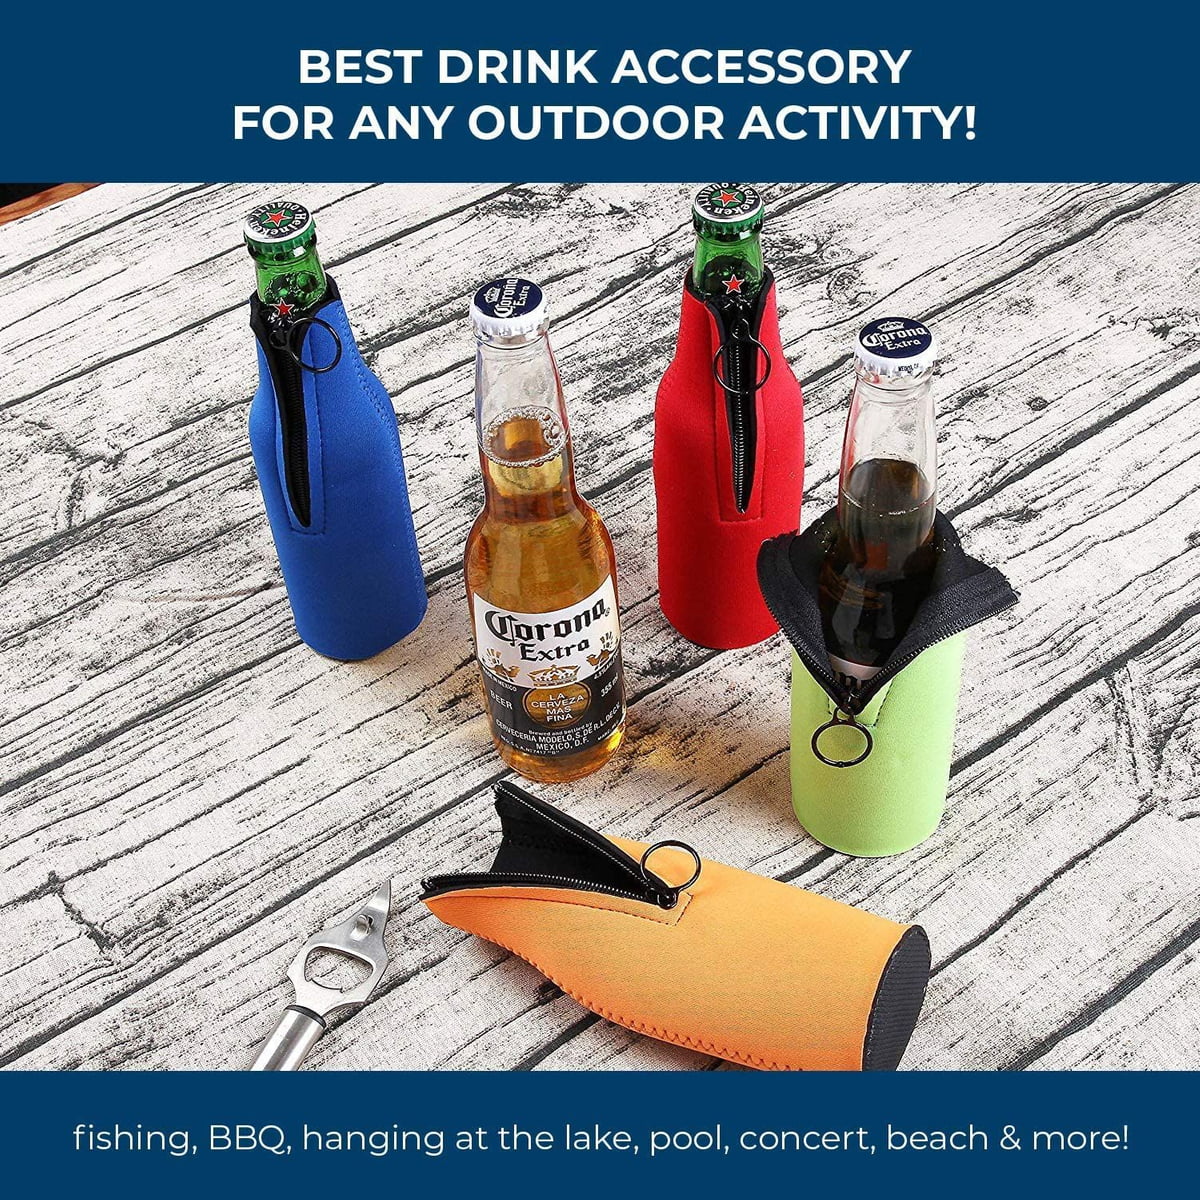 1pcs Beer Bottle Cooler Sleeves with Ring Zipper Collapsible Neoprene  Insulators for 12oz 330ml Bottles Party Drink Thermos